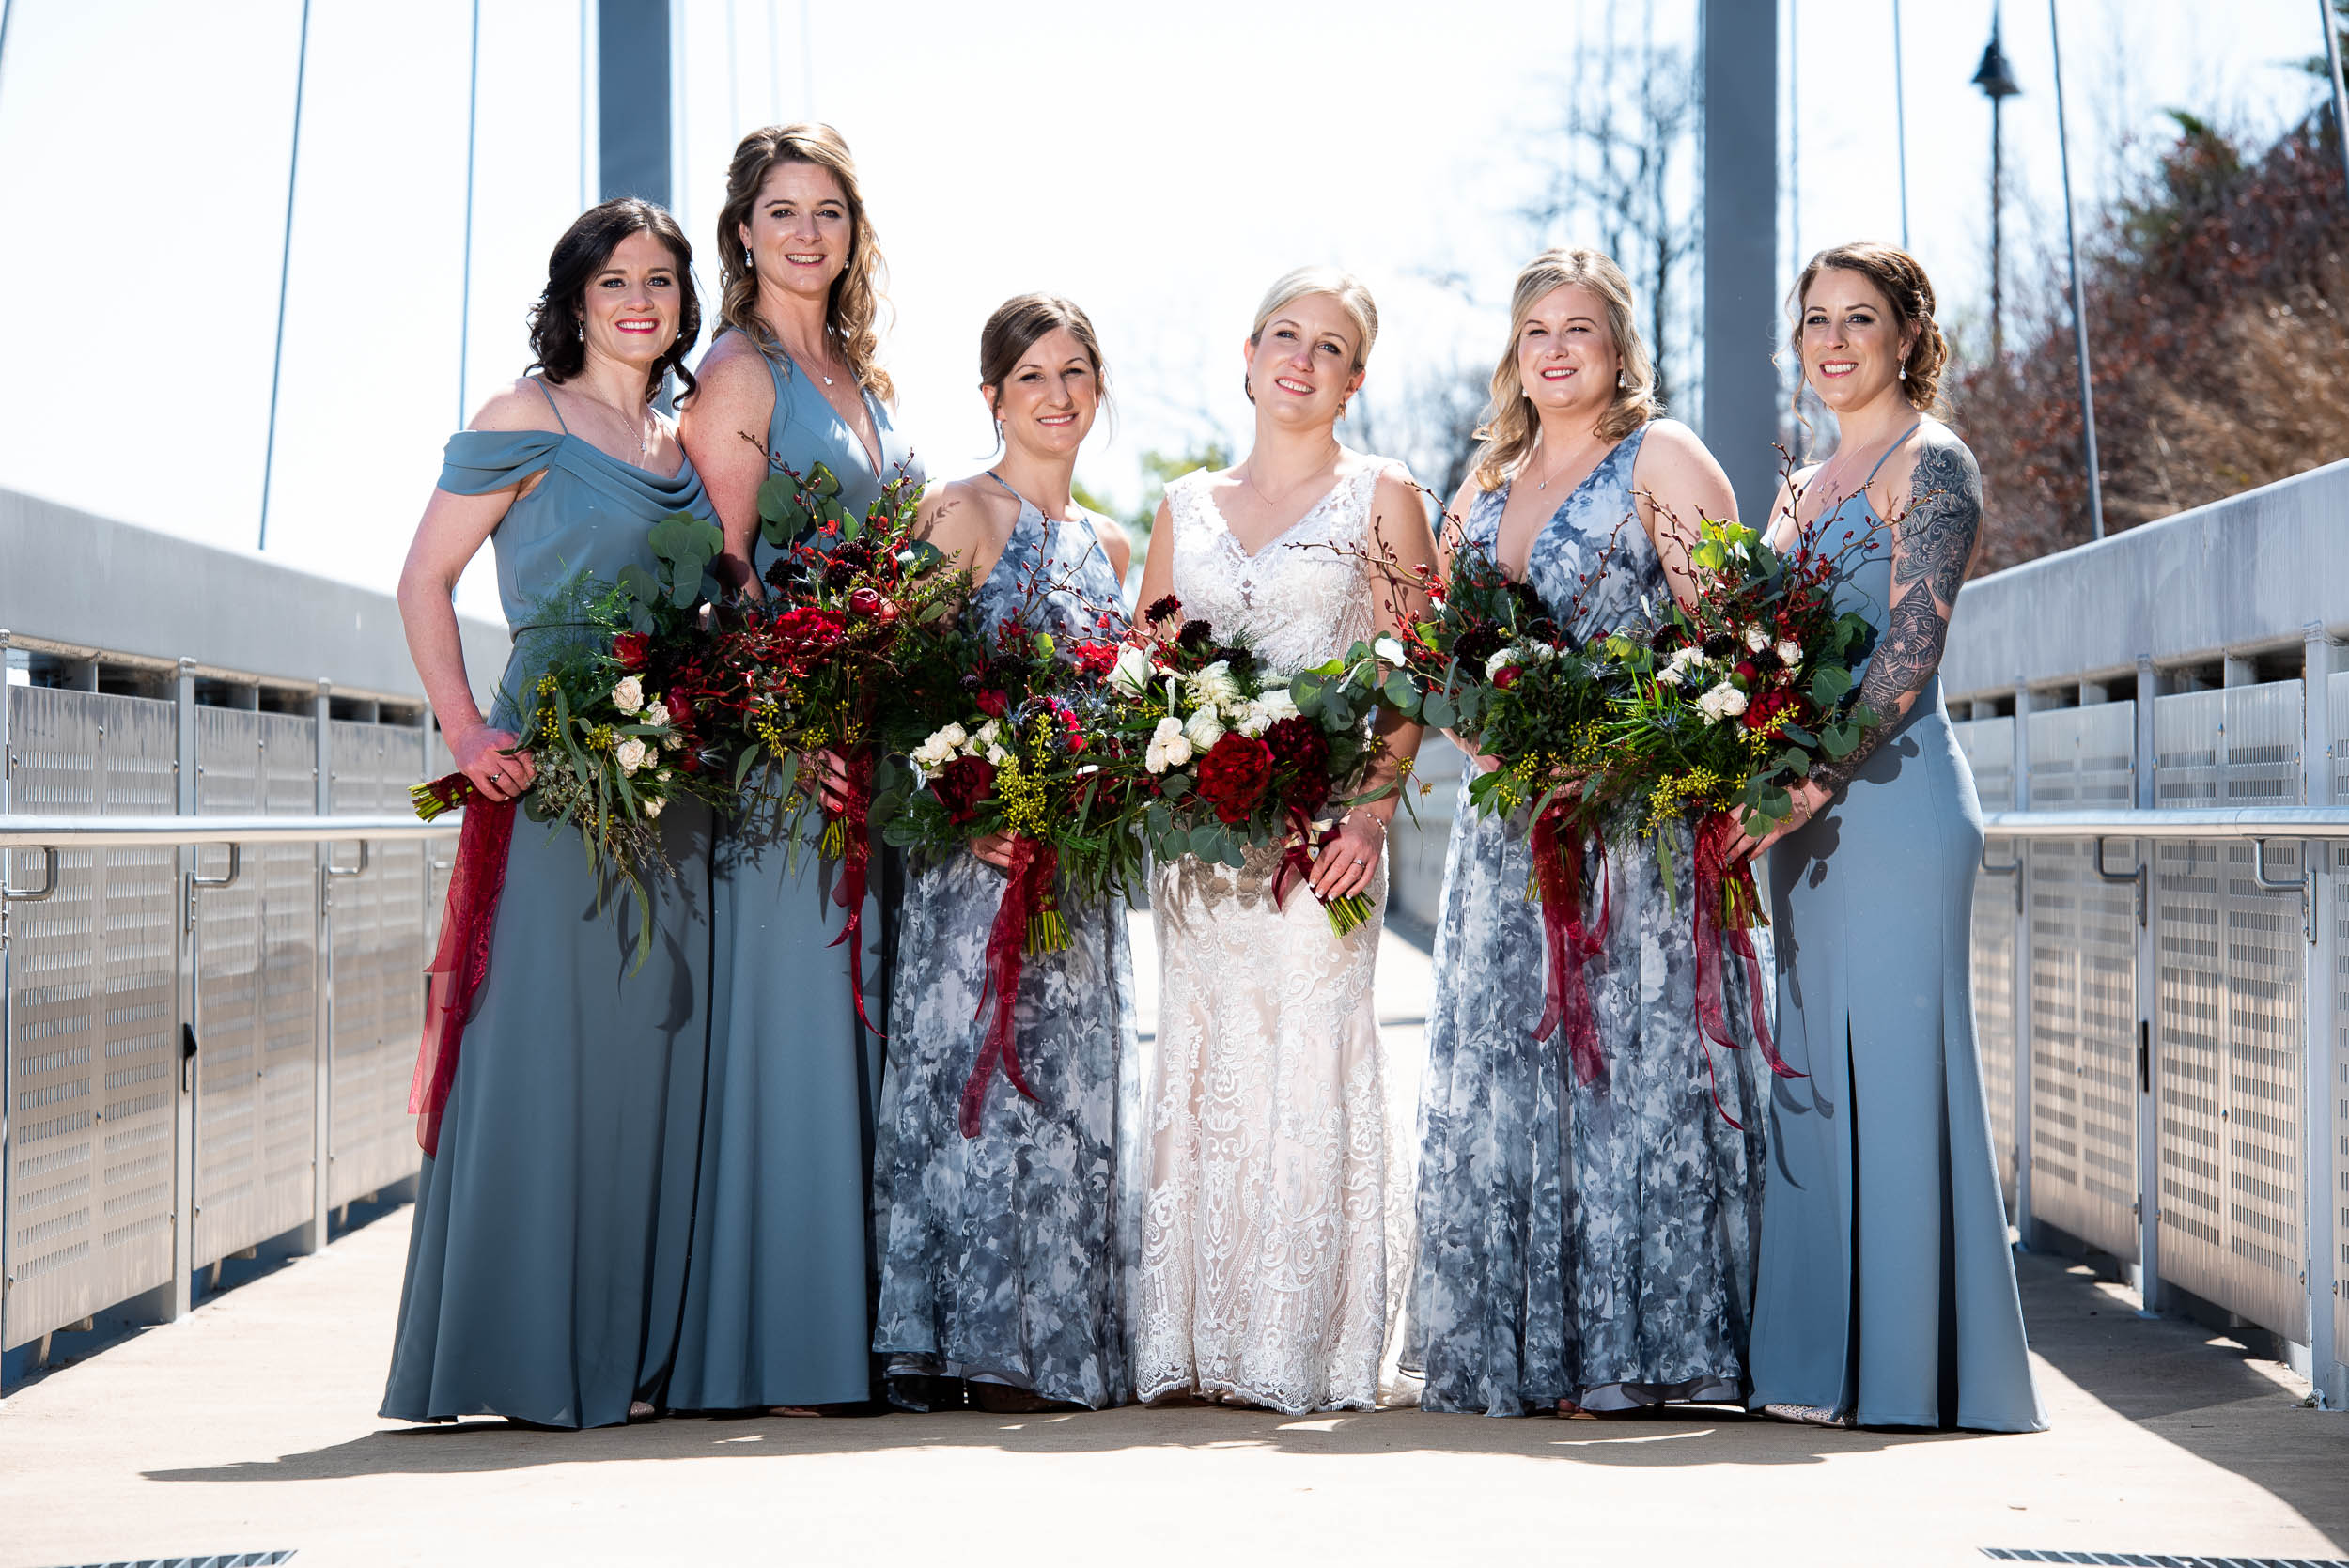 Blue bridesmaids dresses: Modern industrial Chicago wedding inside Prairie Street Brewhouse captured by J. Brown Photography. Find more wedding ideas at jbrownphotography.com!